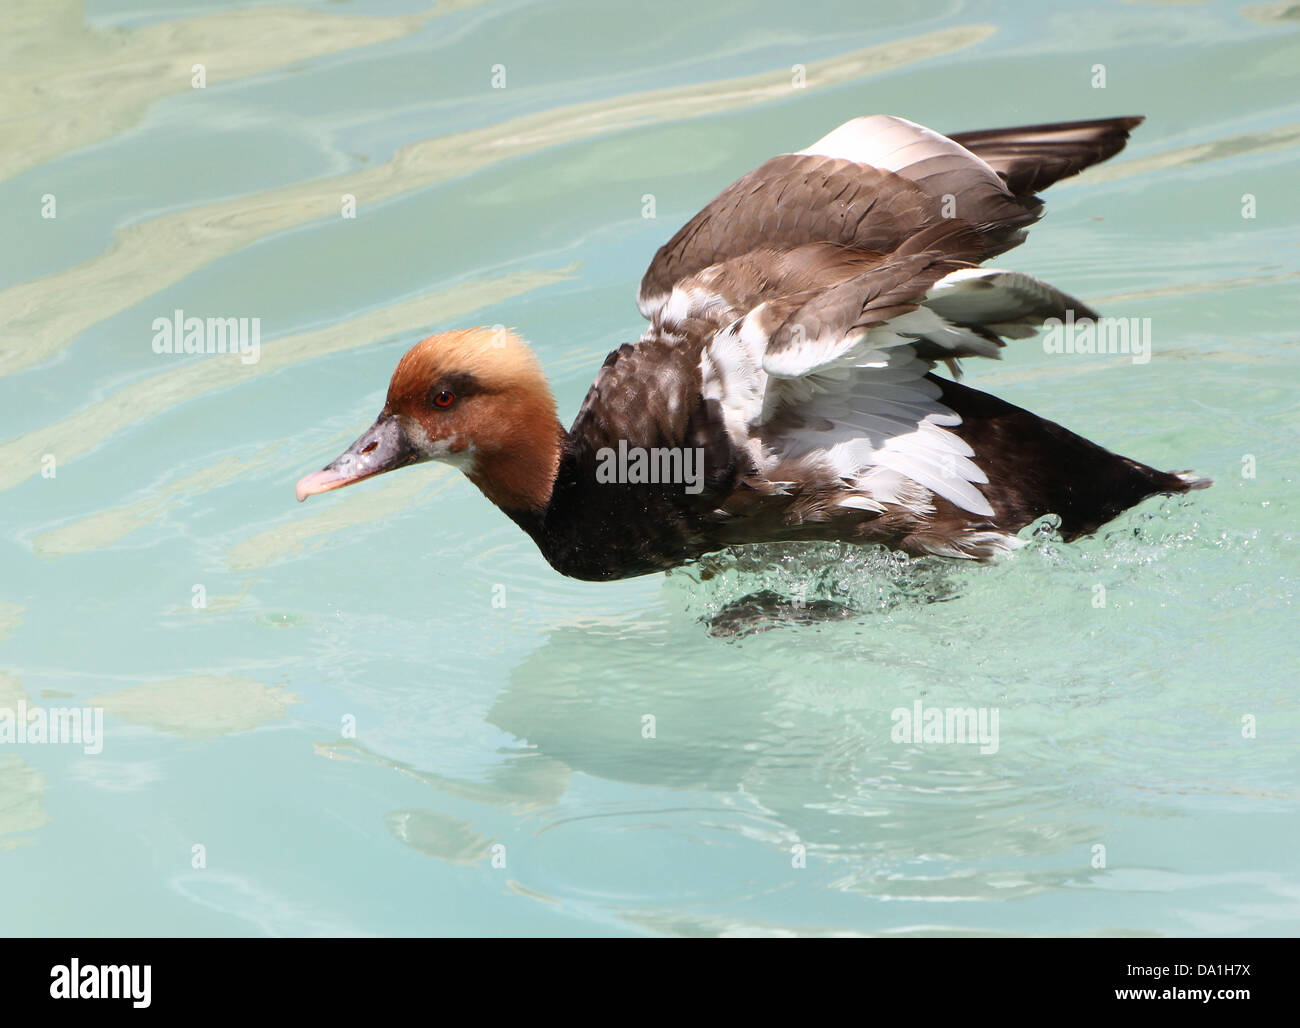 Detailed capture of Male Red-crested Pochard (Netta rufina) touching down & landing in a lake, wings opened - 5 images in series Stock Photo